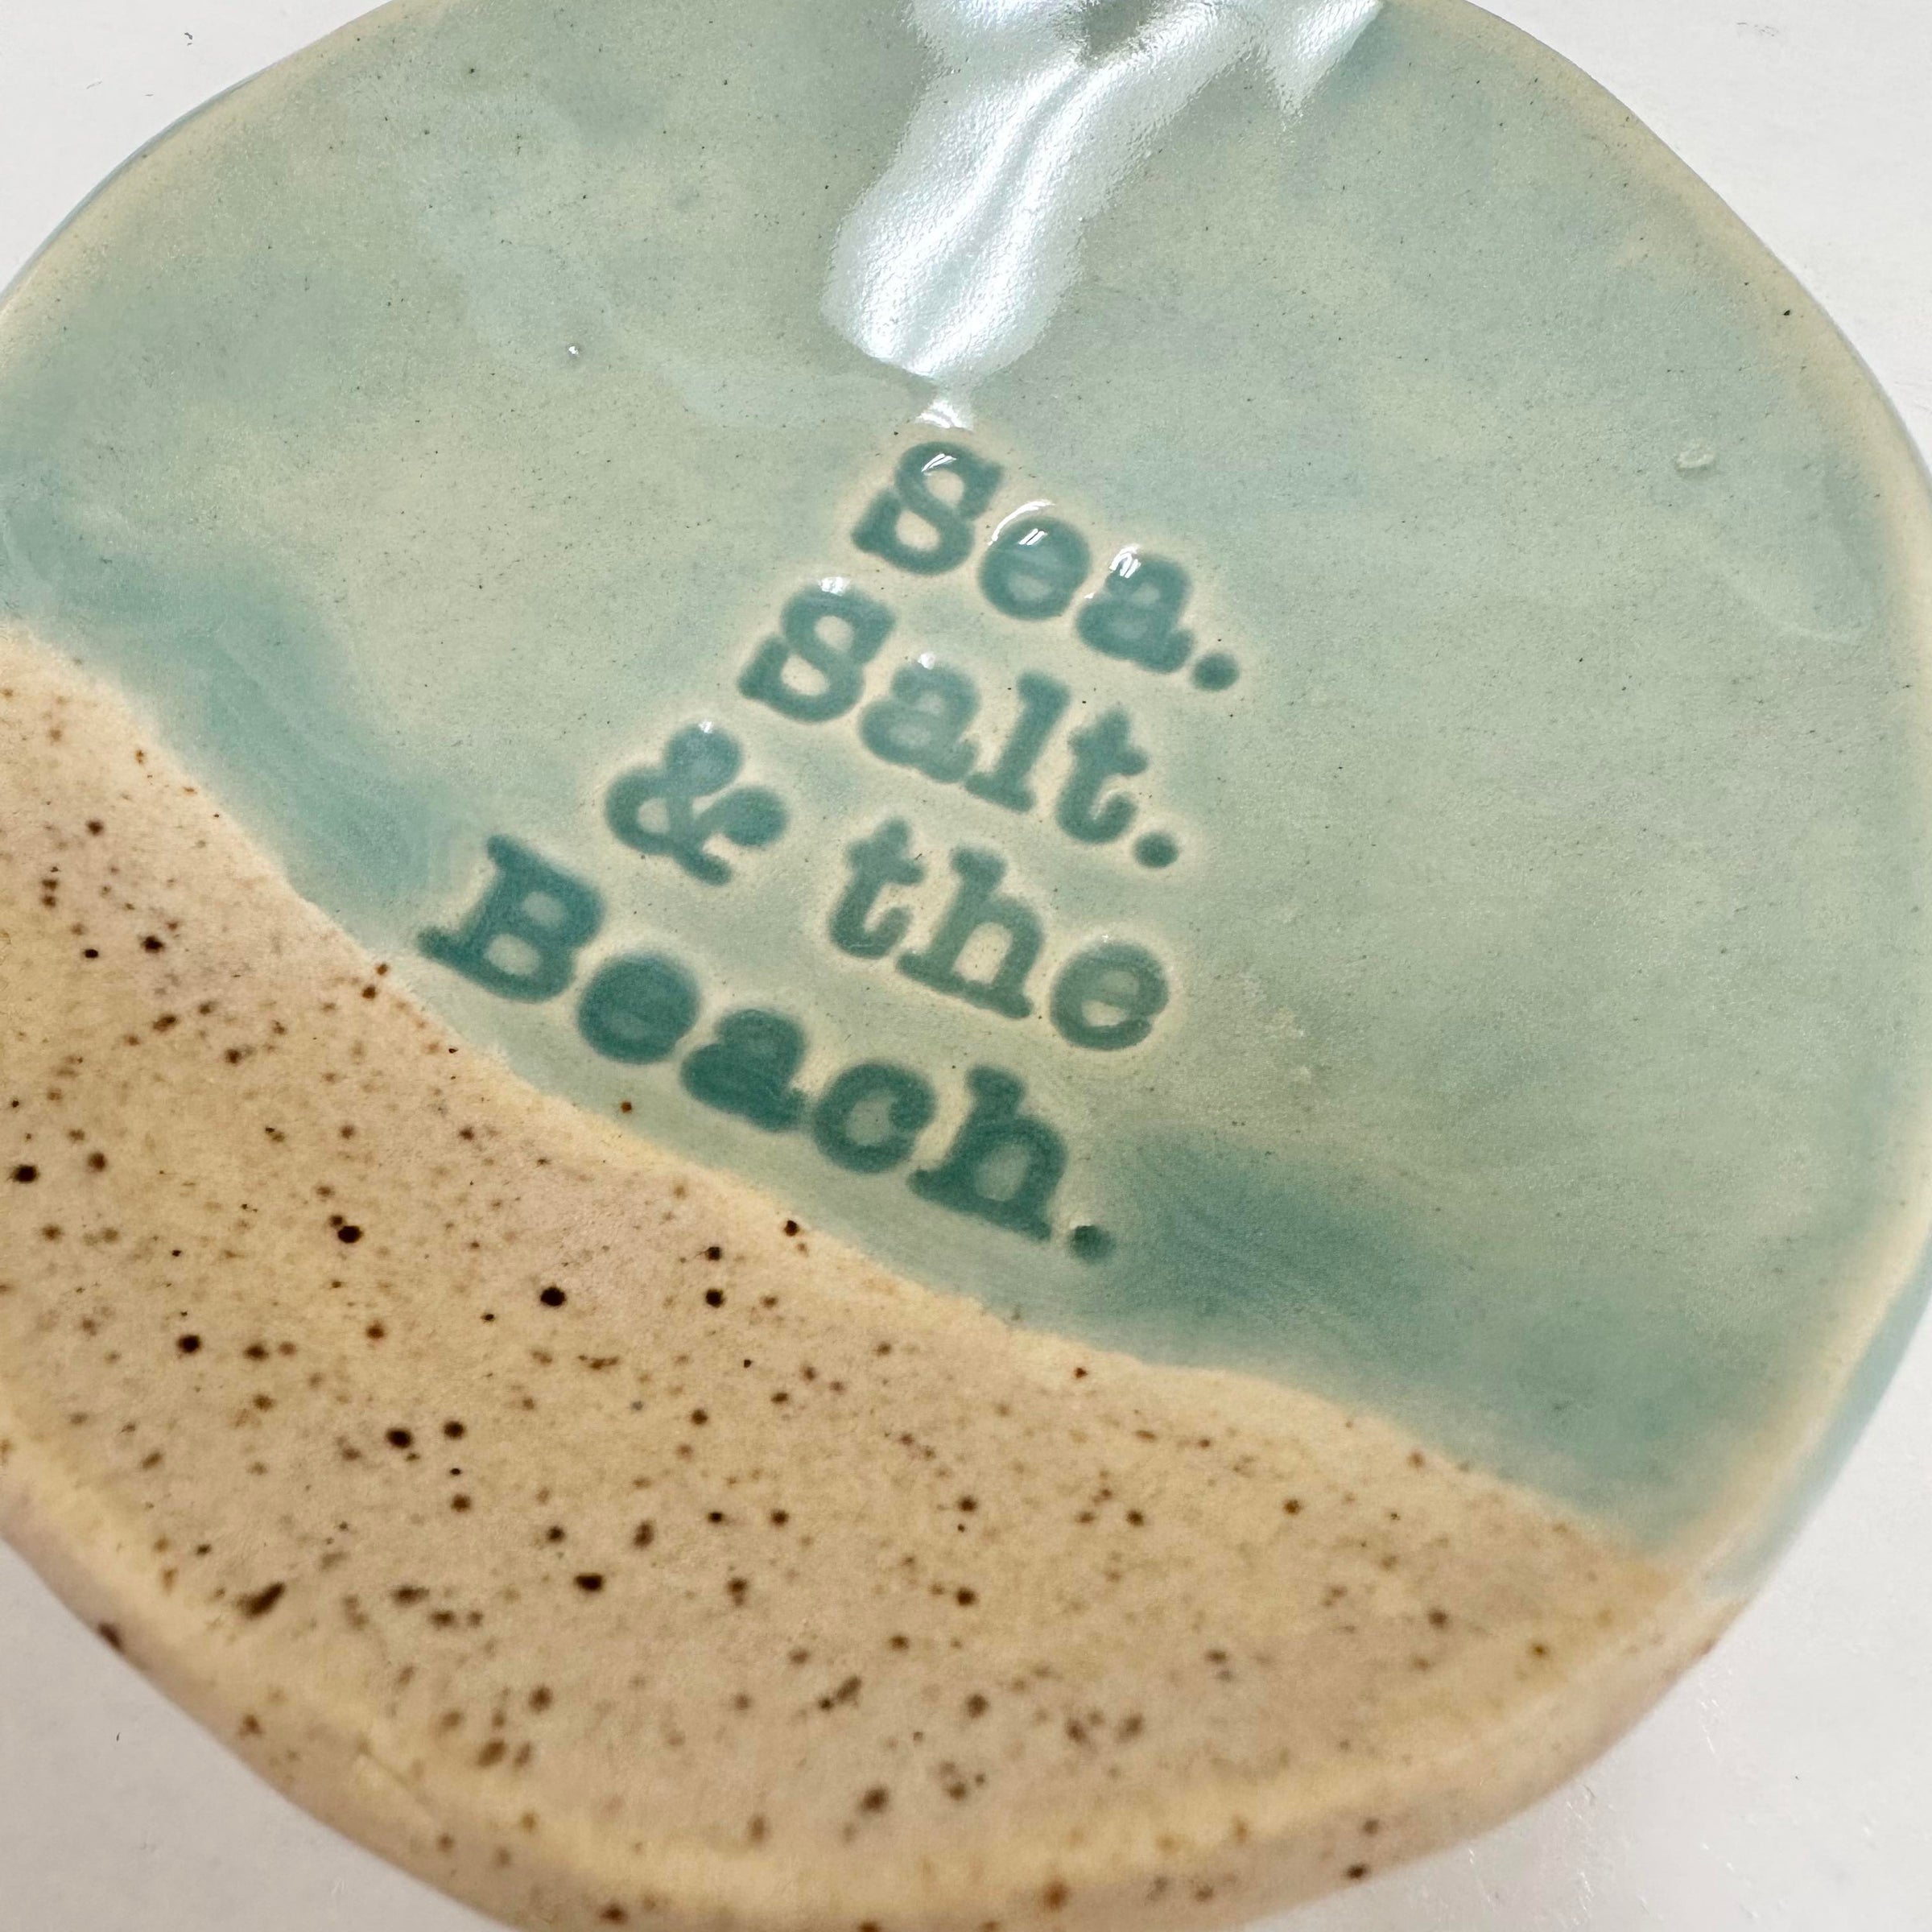 Sea. Salt. & the Beach. Clay Stamped Pottery Ring Dish